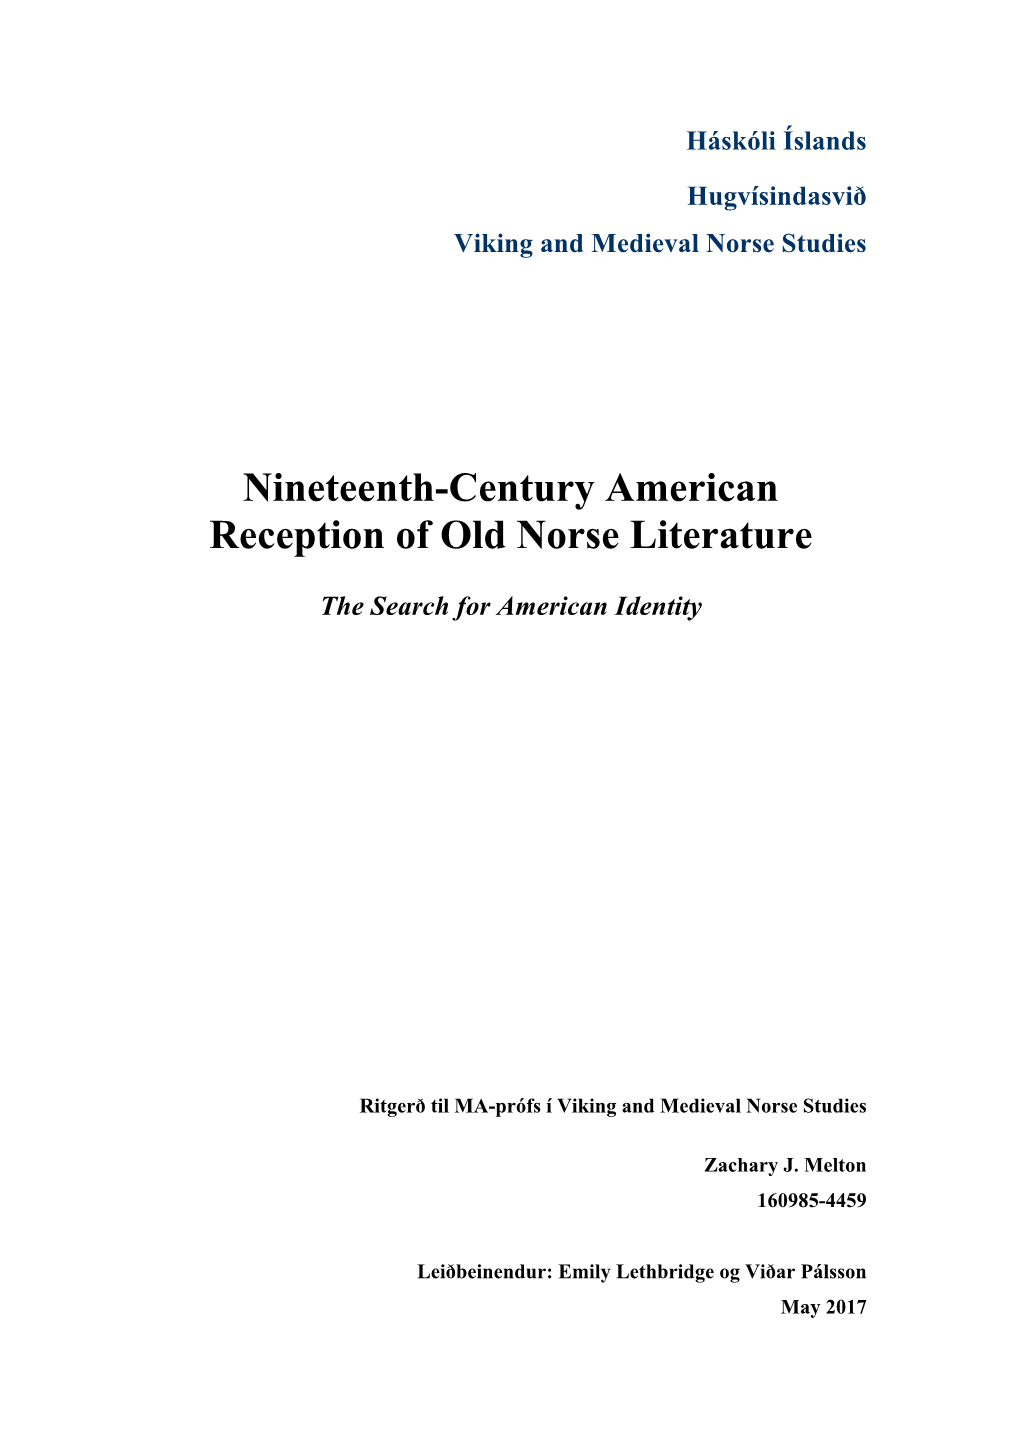 Nineteenth-Century American Reception of Old Norse Literature